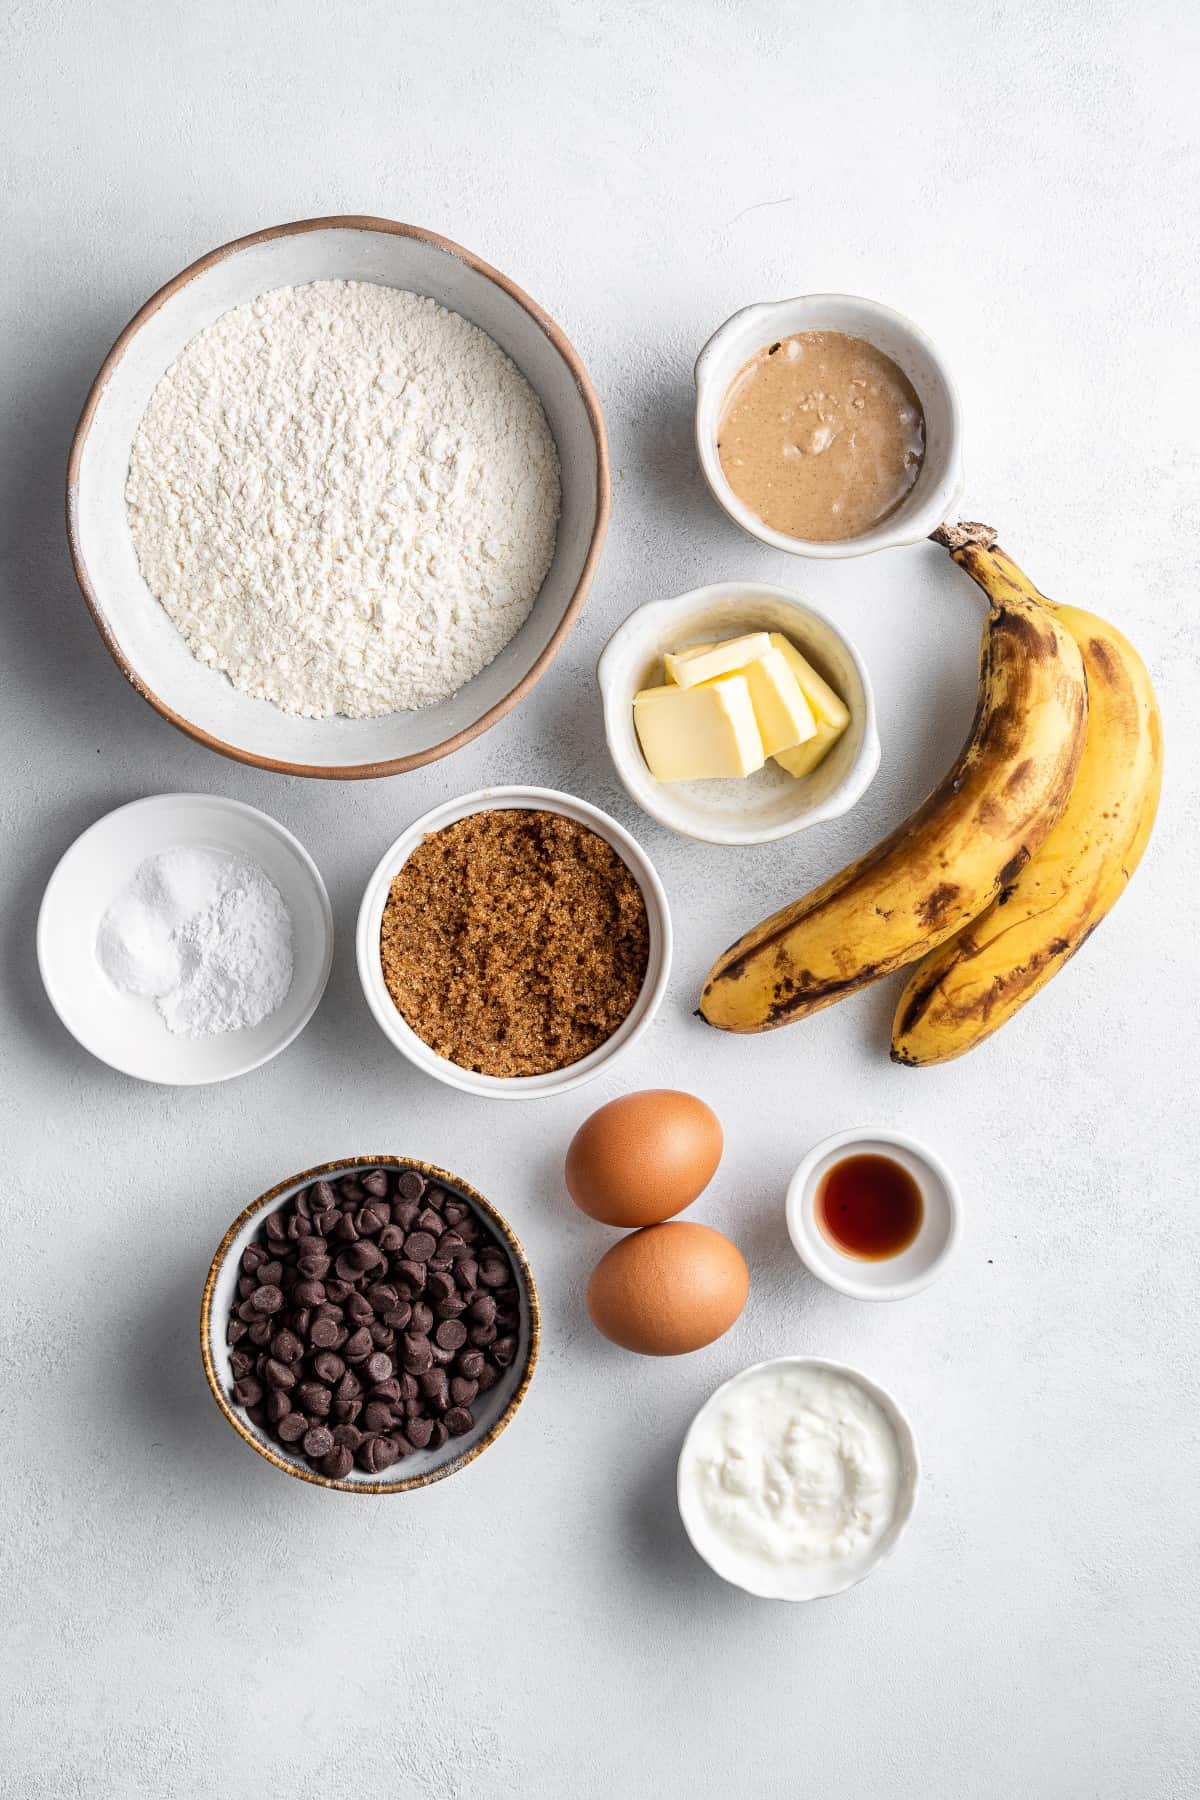 Ingredients for Banana Chocolate Chip Muffins. 